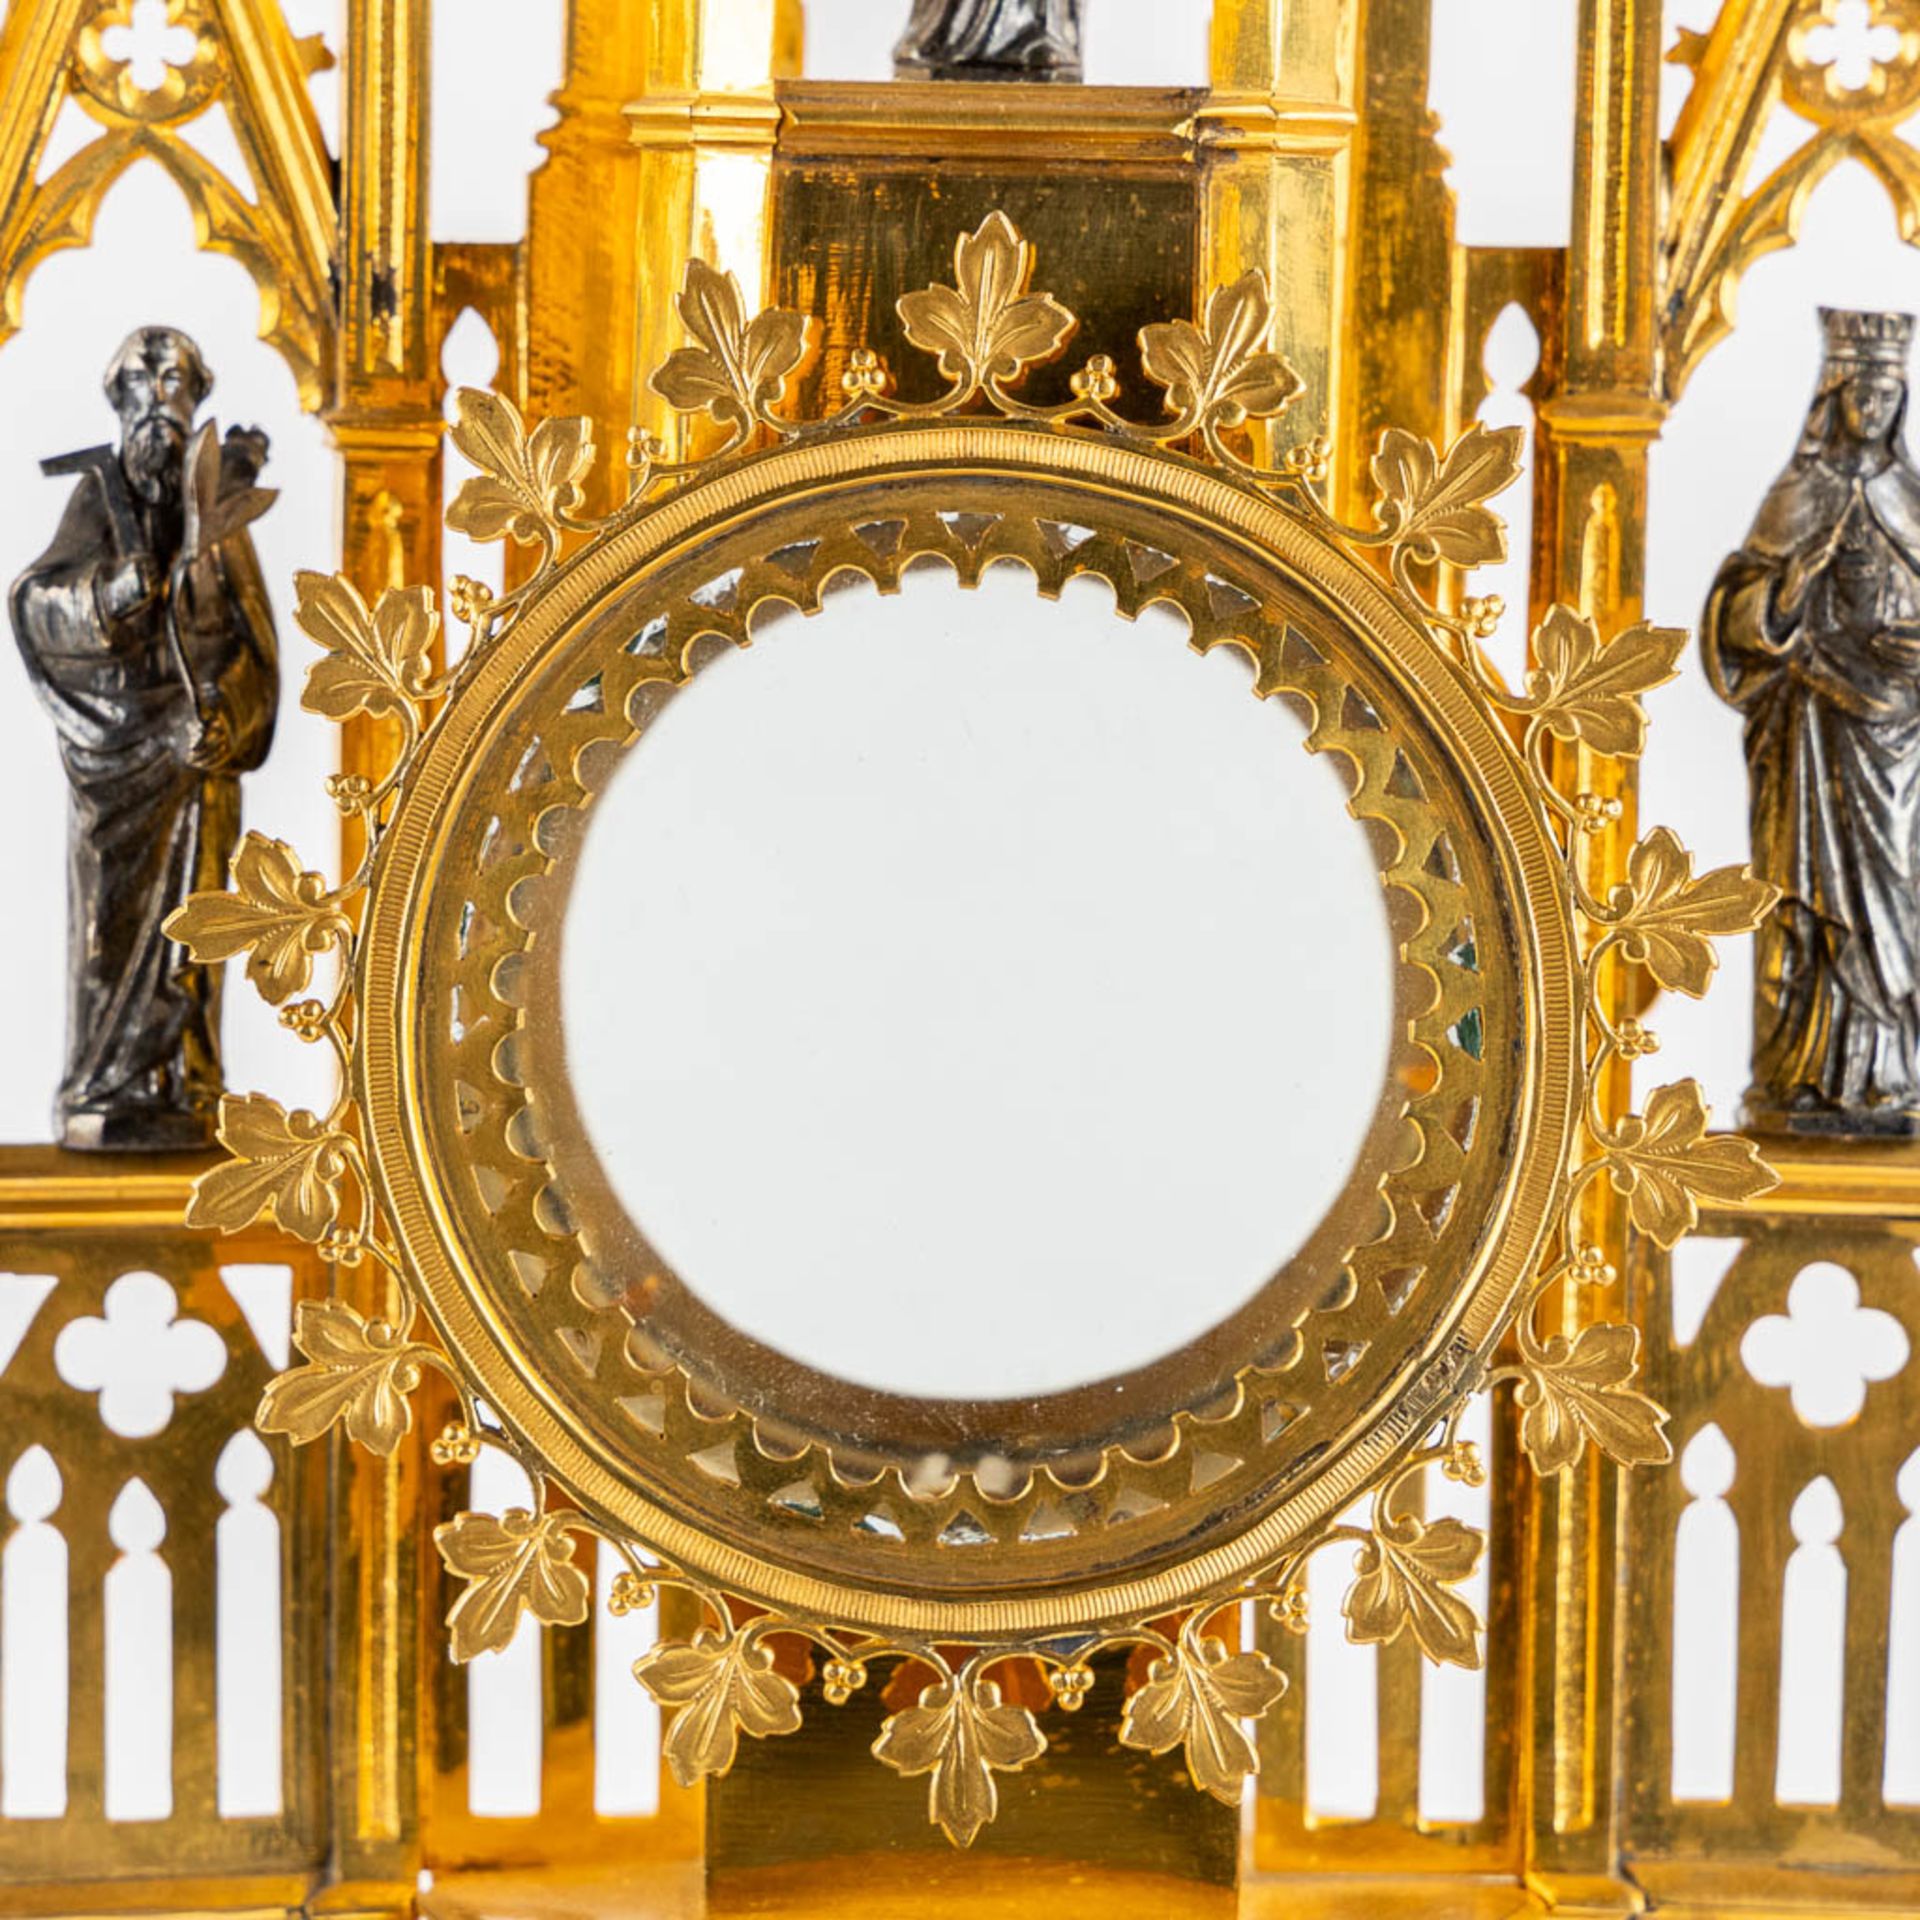 A Tower monstrance, gilt and silver plated brass, Gothic Revival. 19th C. (W:21,5 x H:58 cm) - Image 17 of 22